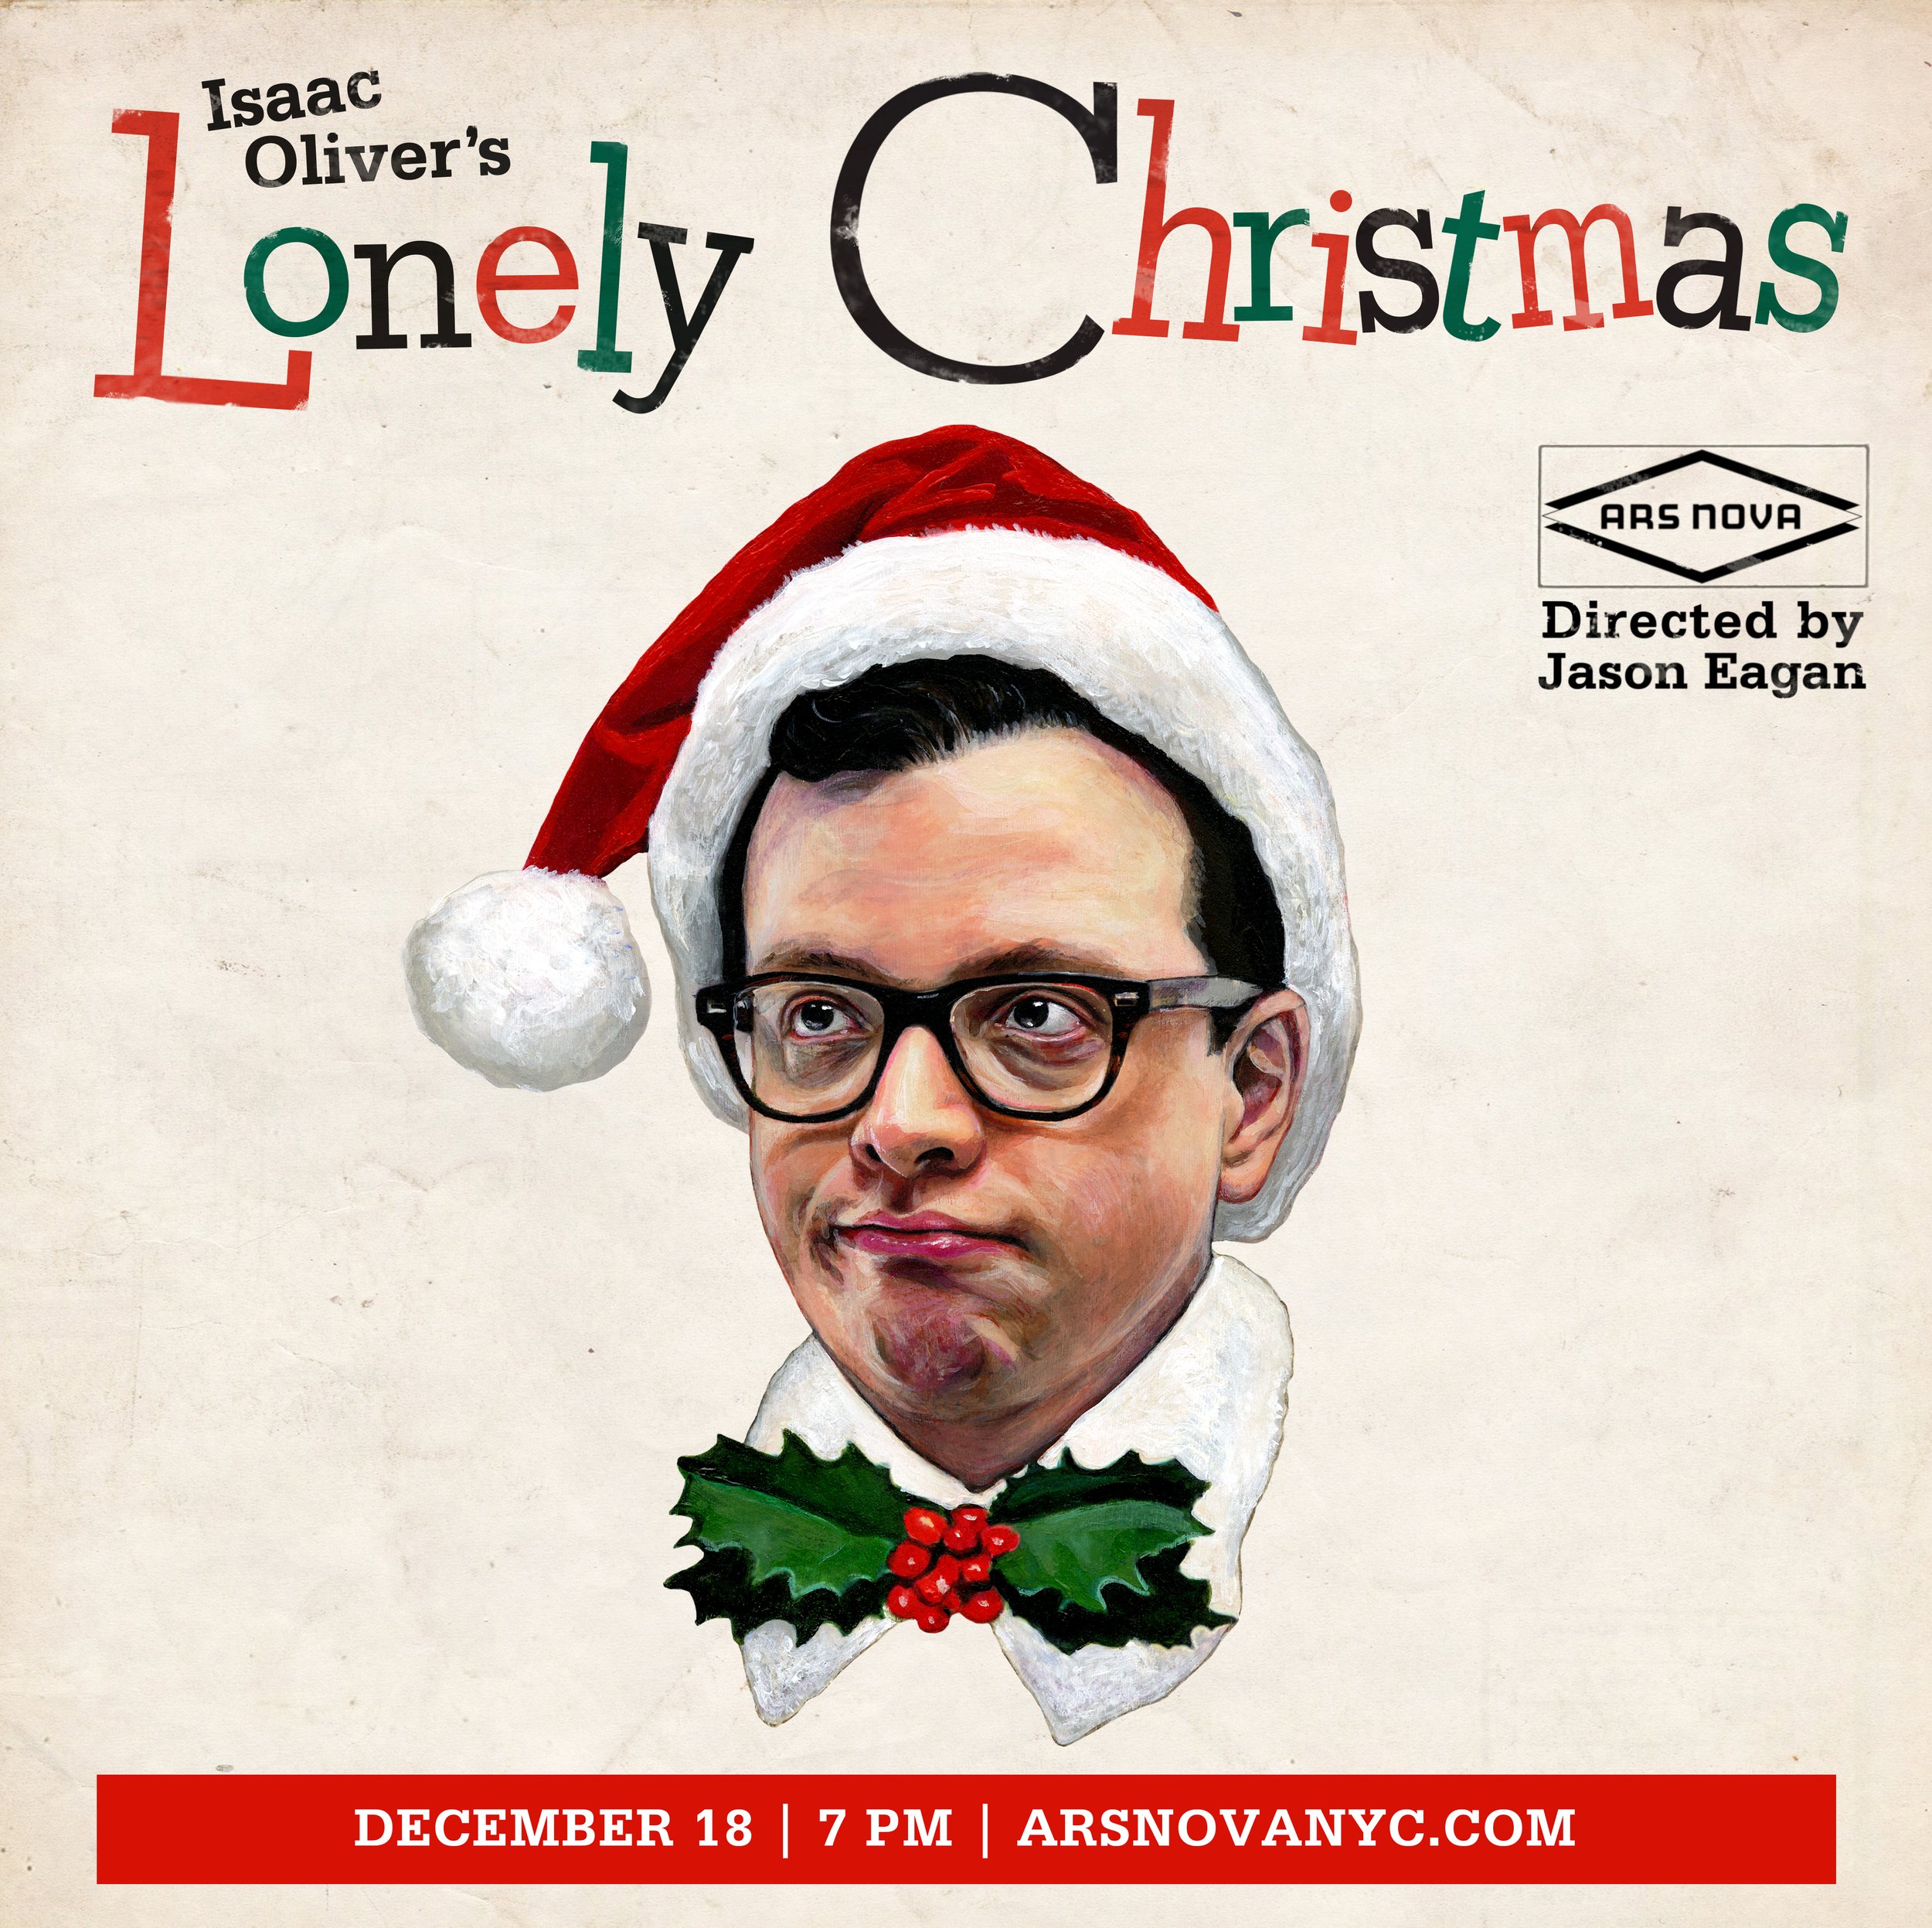 Isaac Oliver's Lonely Christmas show poster